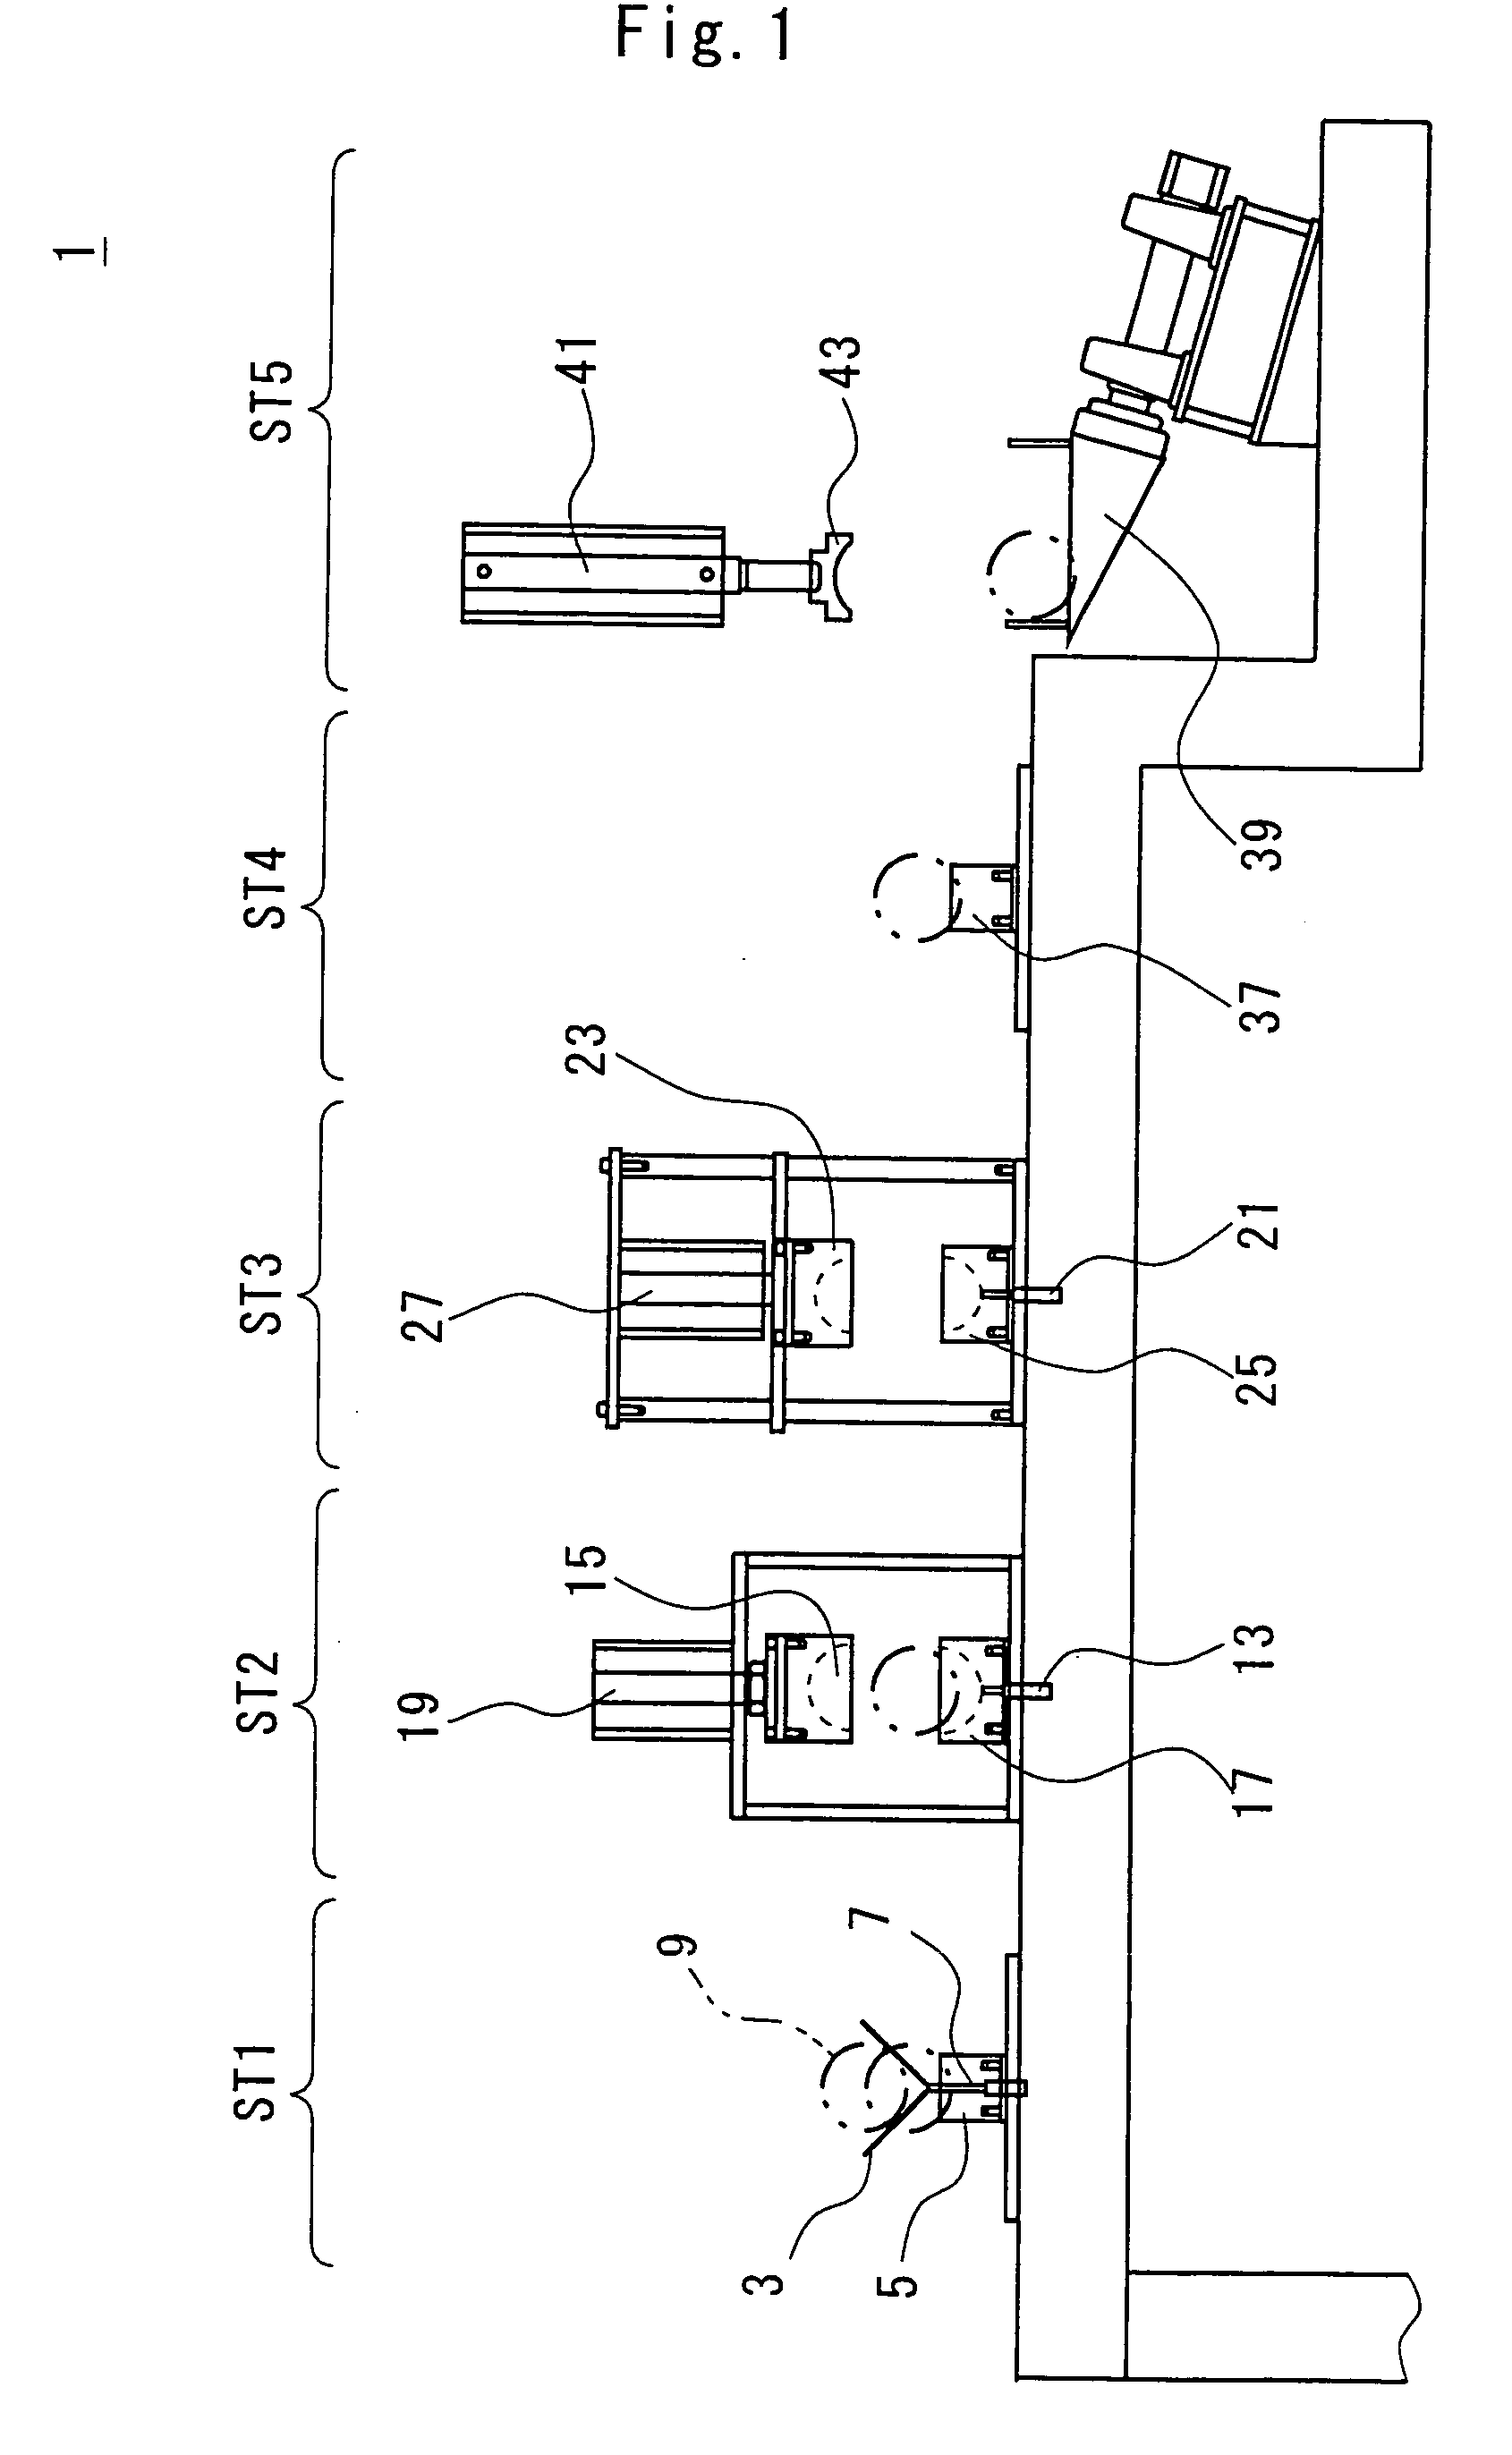 Apparatus for removing cover of golf ball from core